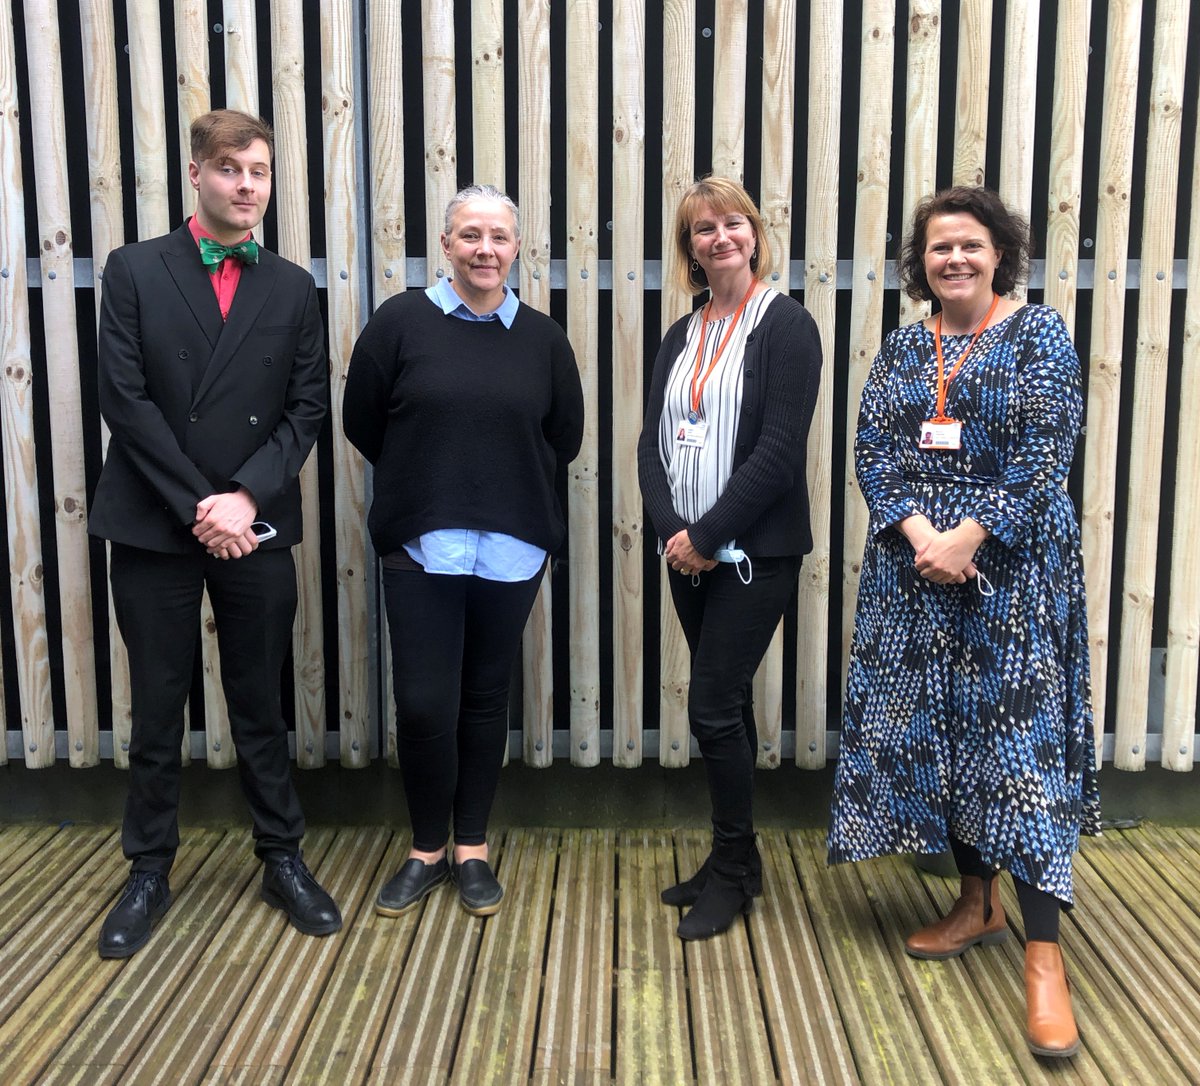 Our Finance team supports research by costing Plymouth Investigator-led studies as part of the set-up of all @UHP_NHS site studies. They ensure all research income is received & assist with finance queries, such as patient expenses & purchasing items from research funds. #ICTD22